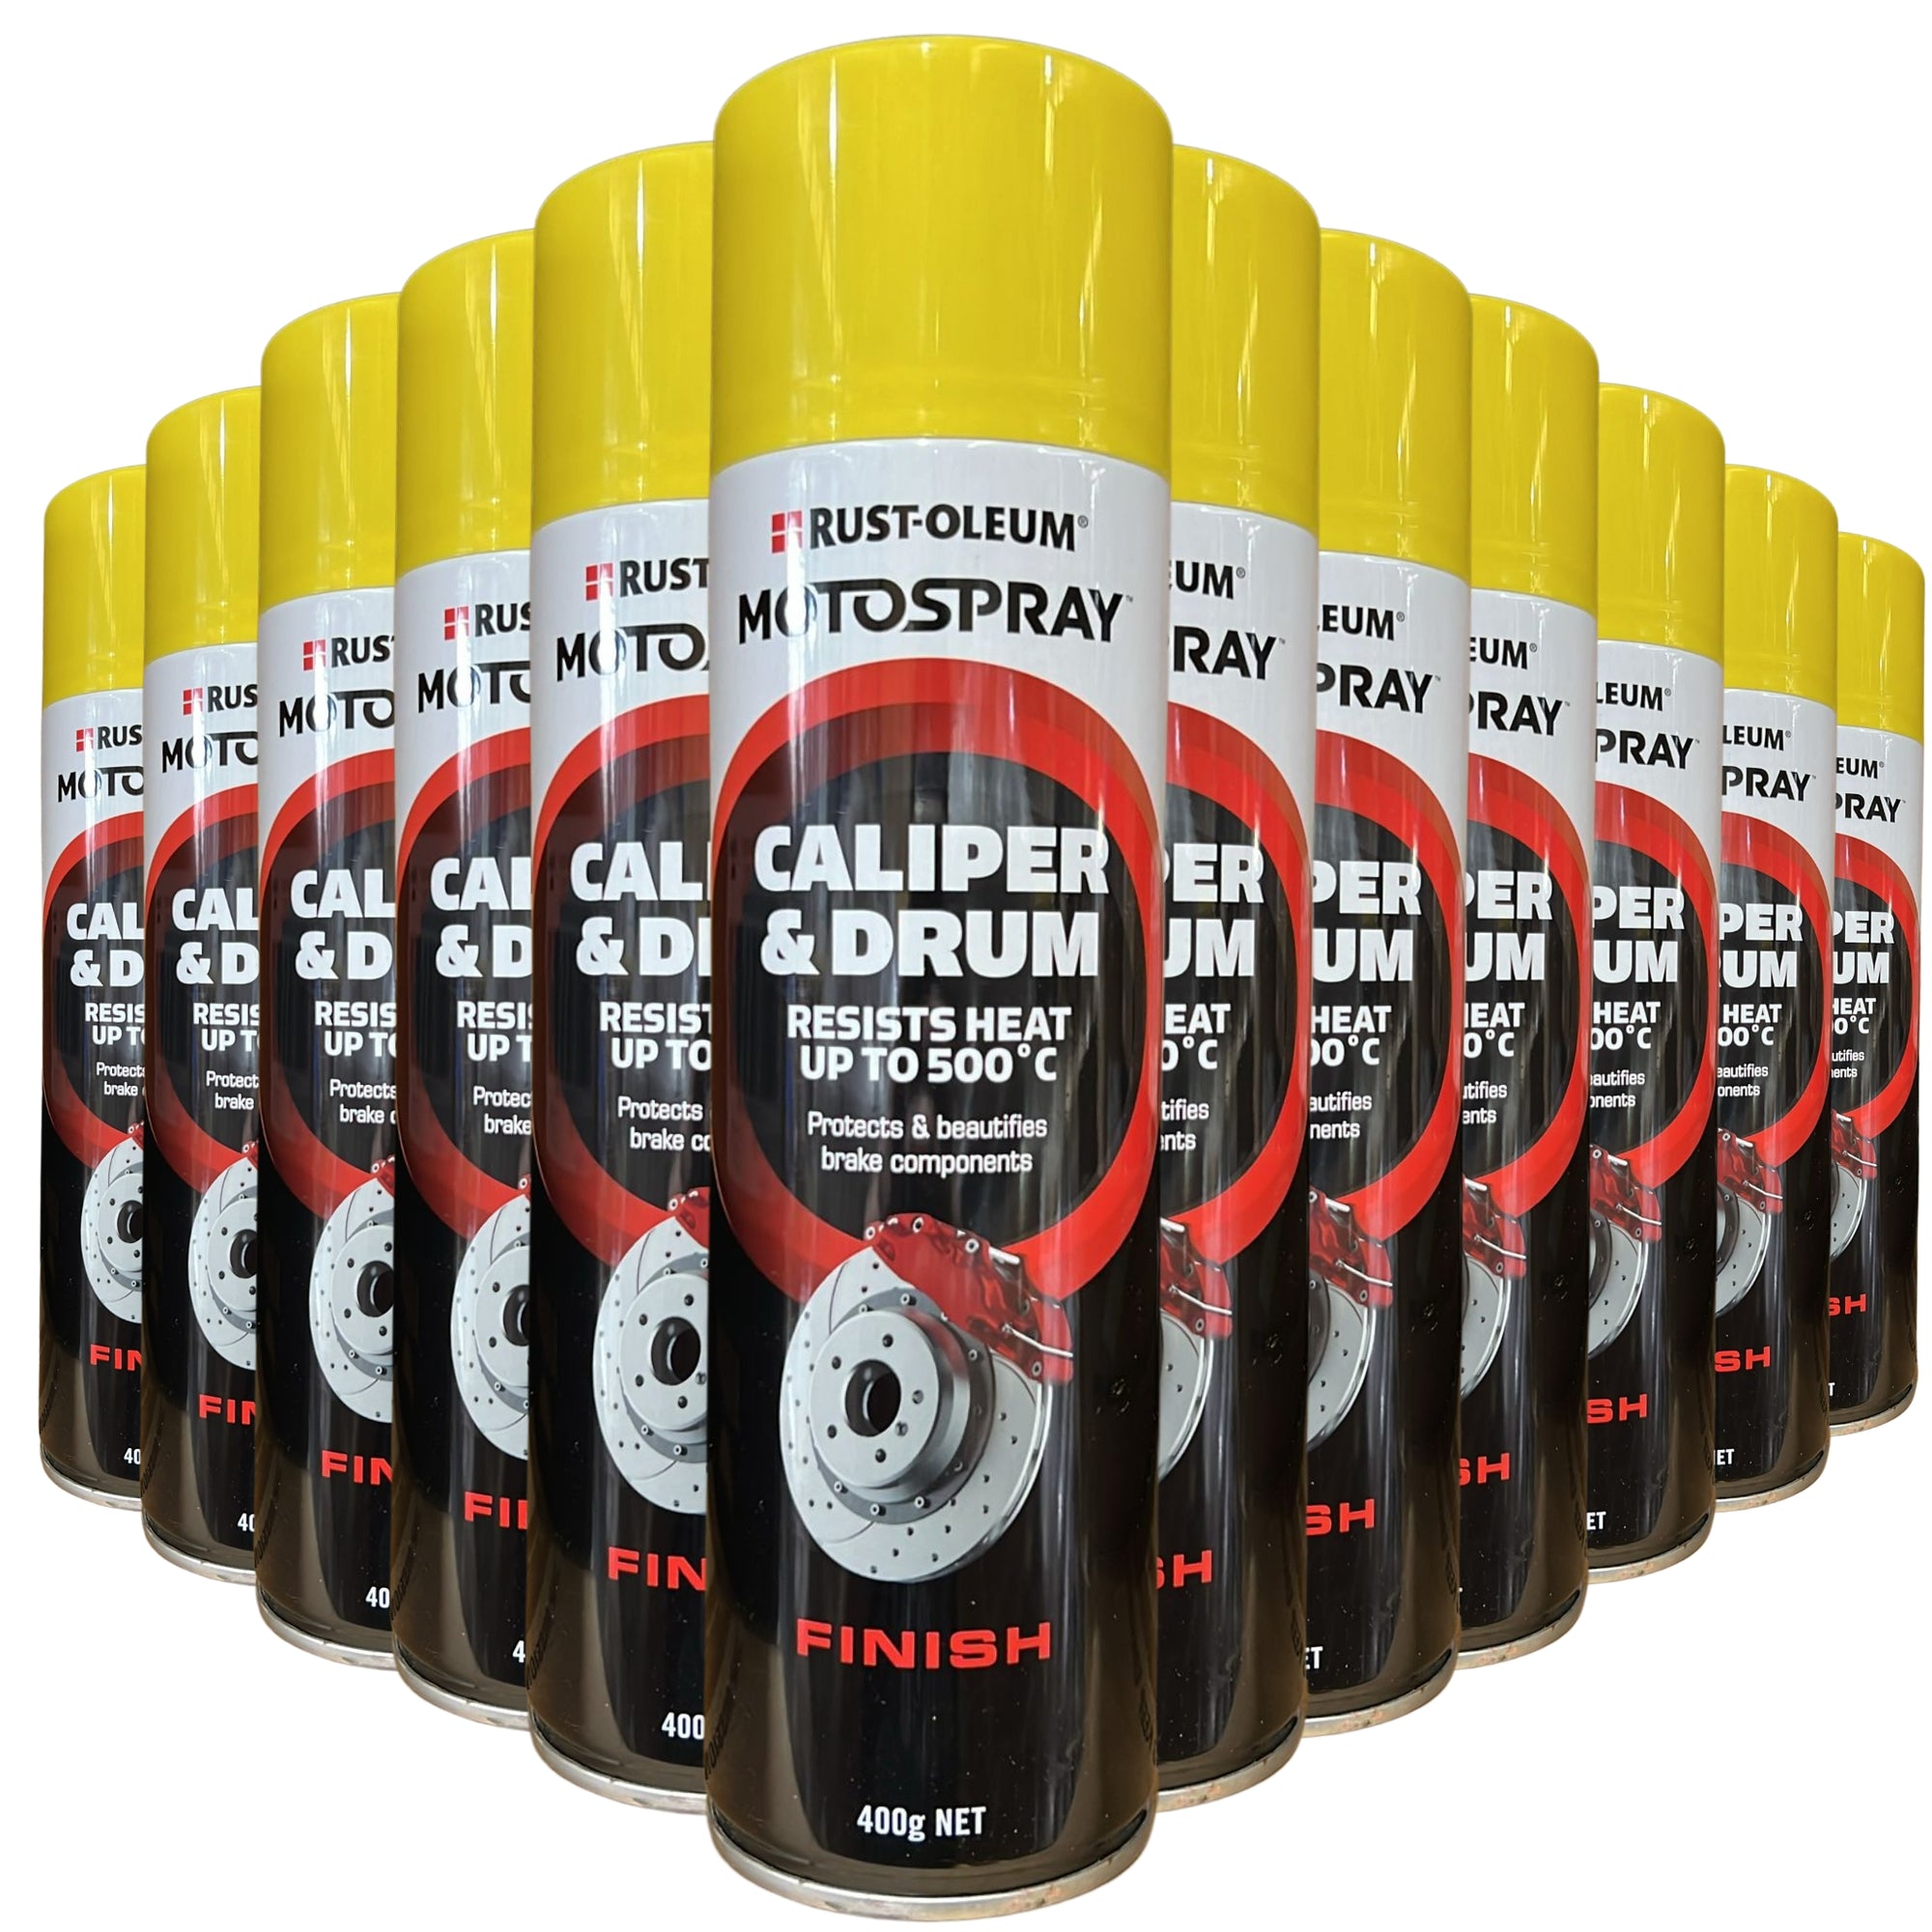 RUSTOLEUM MOTOSPRAY BRAKE CALIPER &amp; DRUM PAINT (UP TO 500C / 932F) BRIGHT YELLOW 400G CP4003 (12 Cans) - South East Clearance Centre